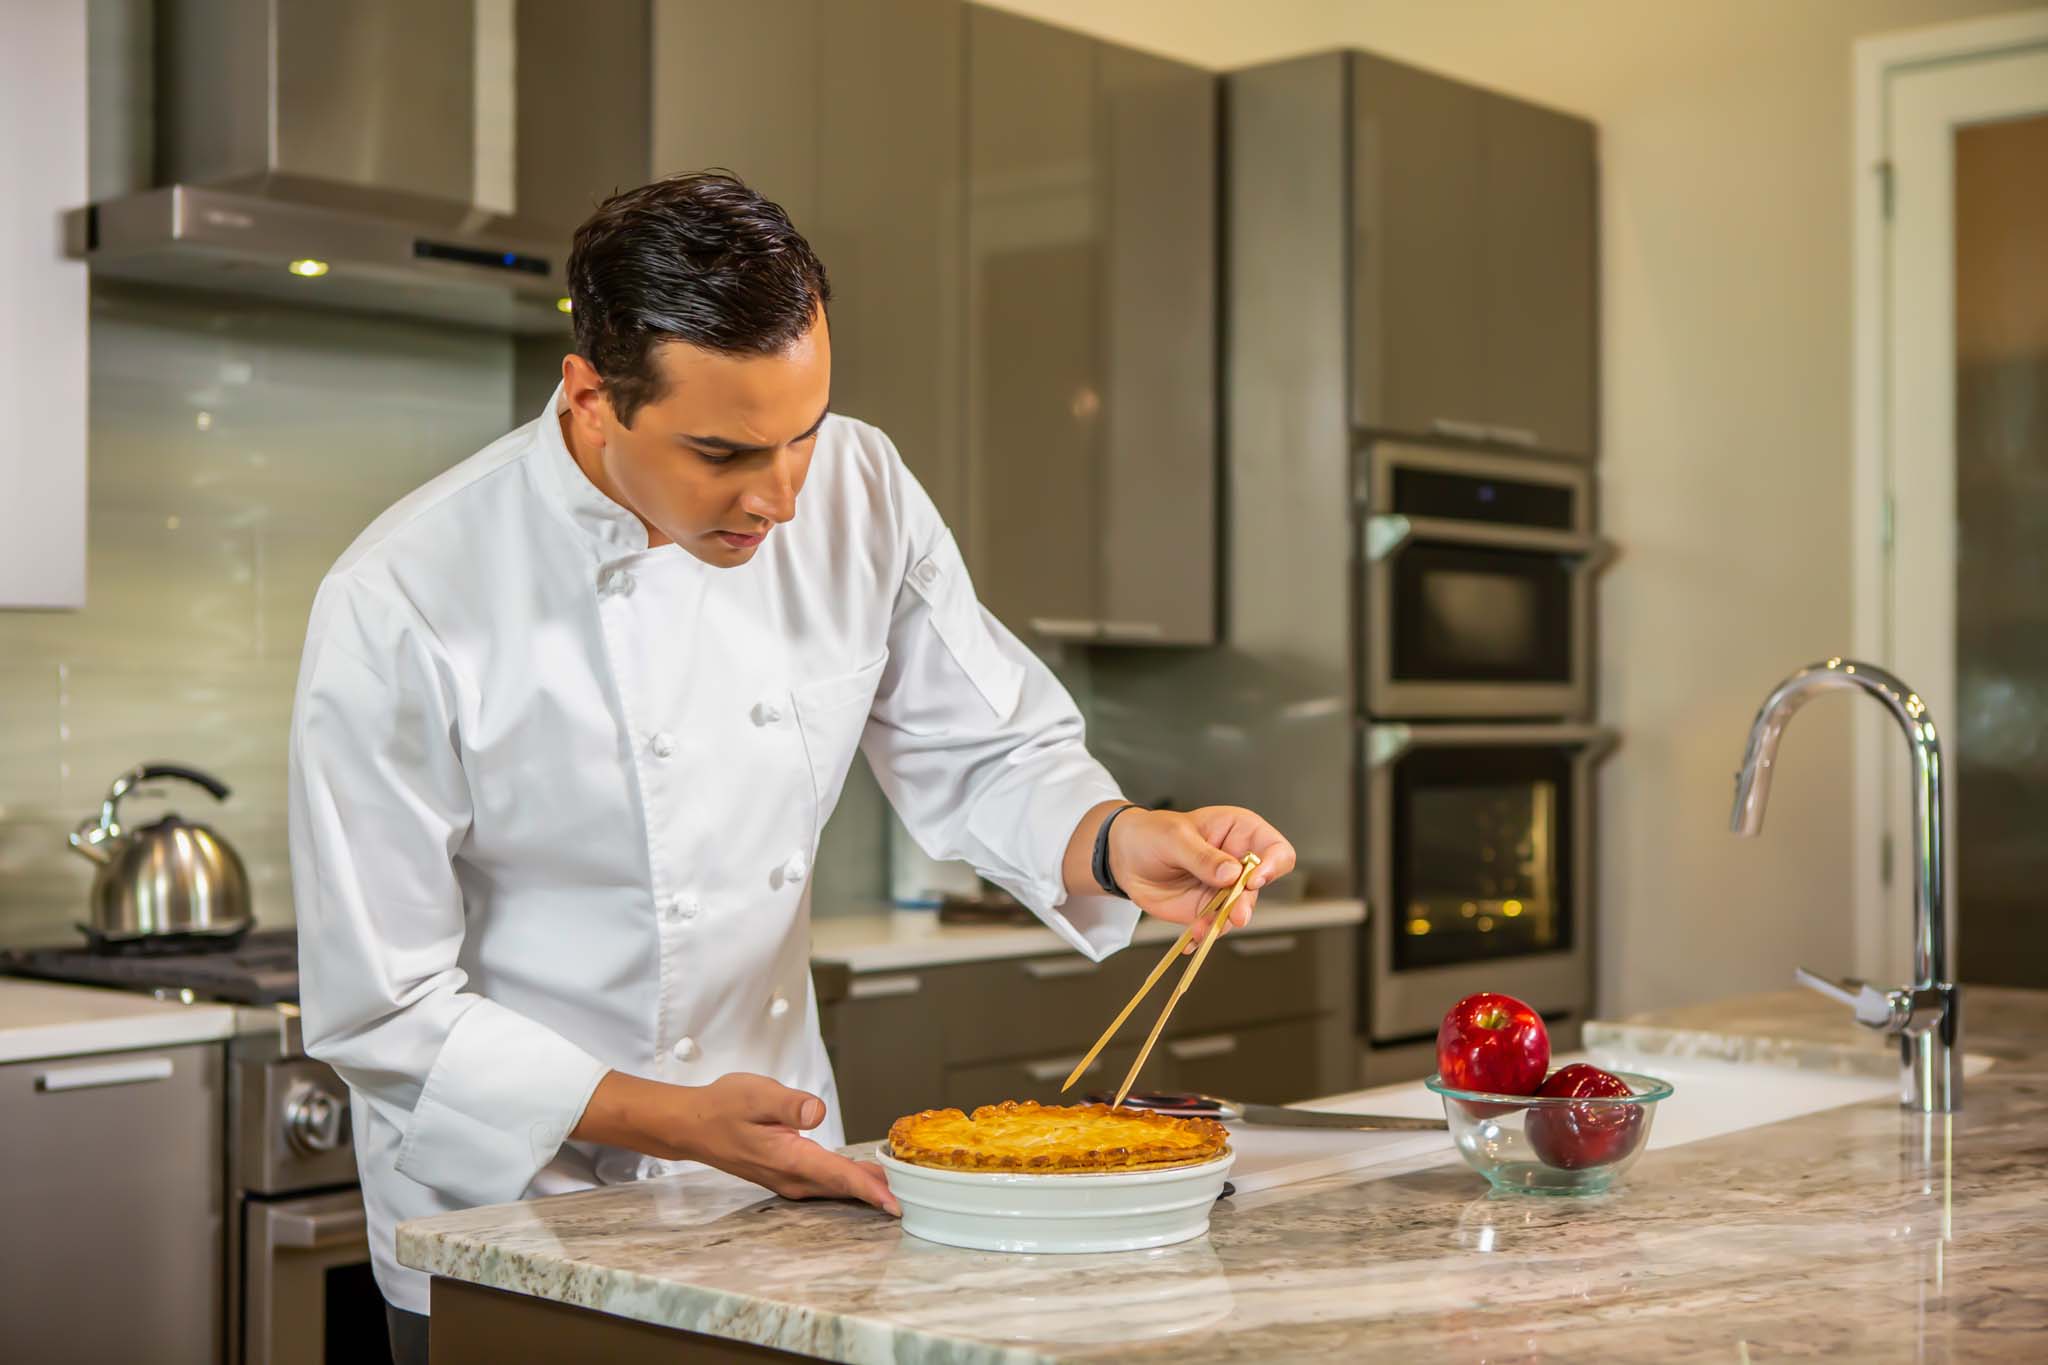 An expert chef prepares a meal during an in-home chef experience.